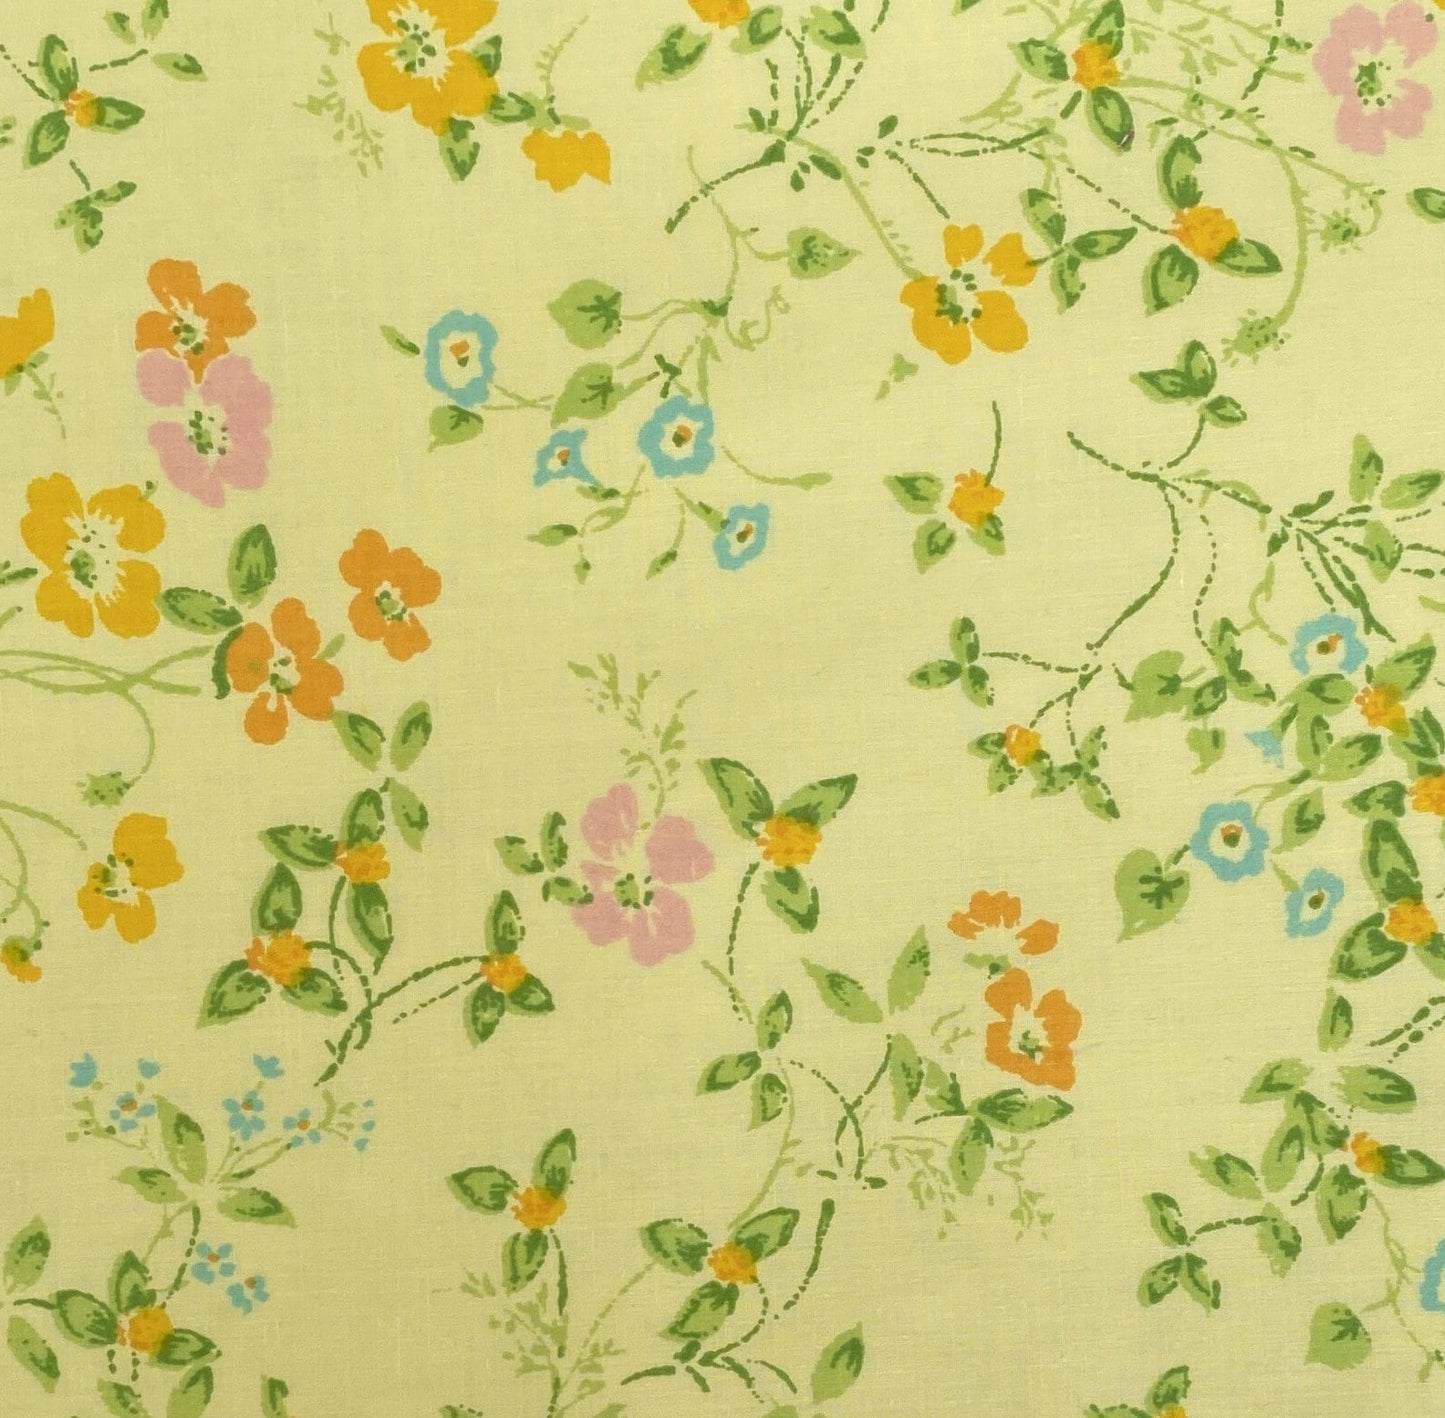 Yellow Fabric / Bright Yellow, Pink and Blue Flowers / Green and Light Green Leaves and Stems